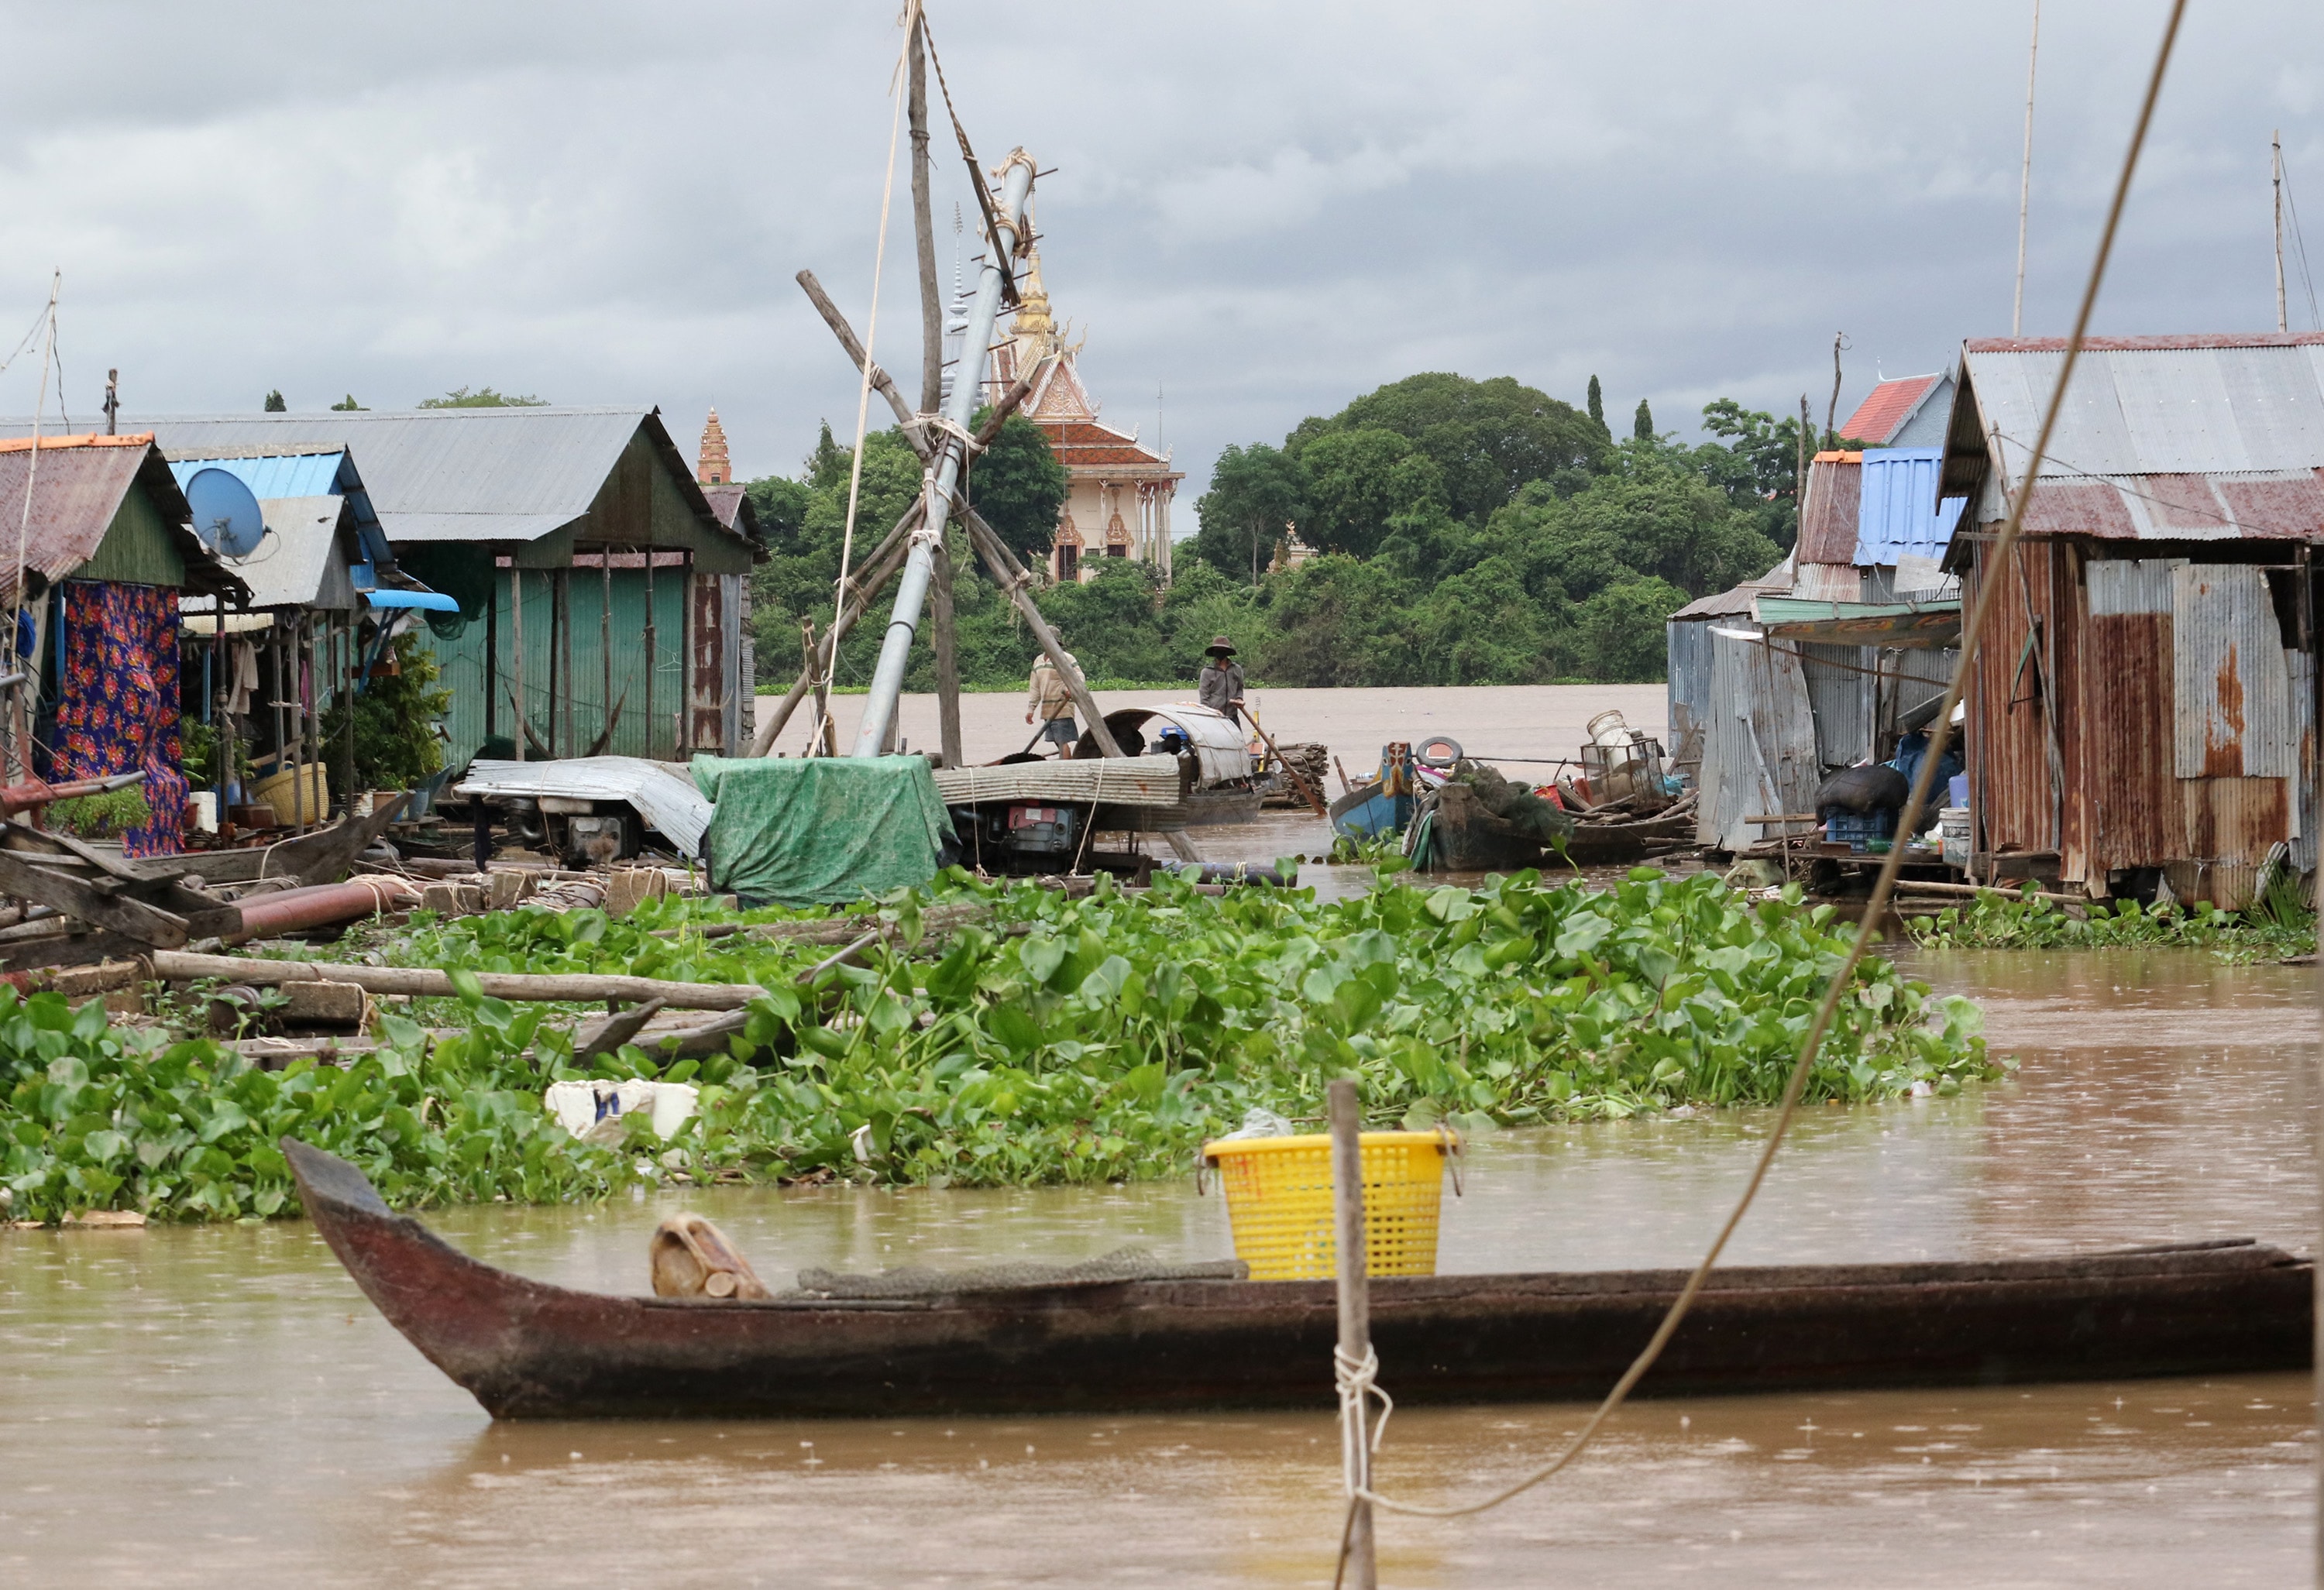 Villagers travel by boat to their home in a floating village on the Tonle Sap River near Phnom Penh, Cambodia. A United Methodist team visited the area to explore ways the church can help fight human trafficking. Photo by the Rev. Thomas Kim, UM News.